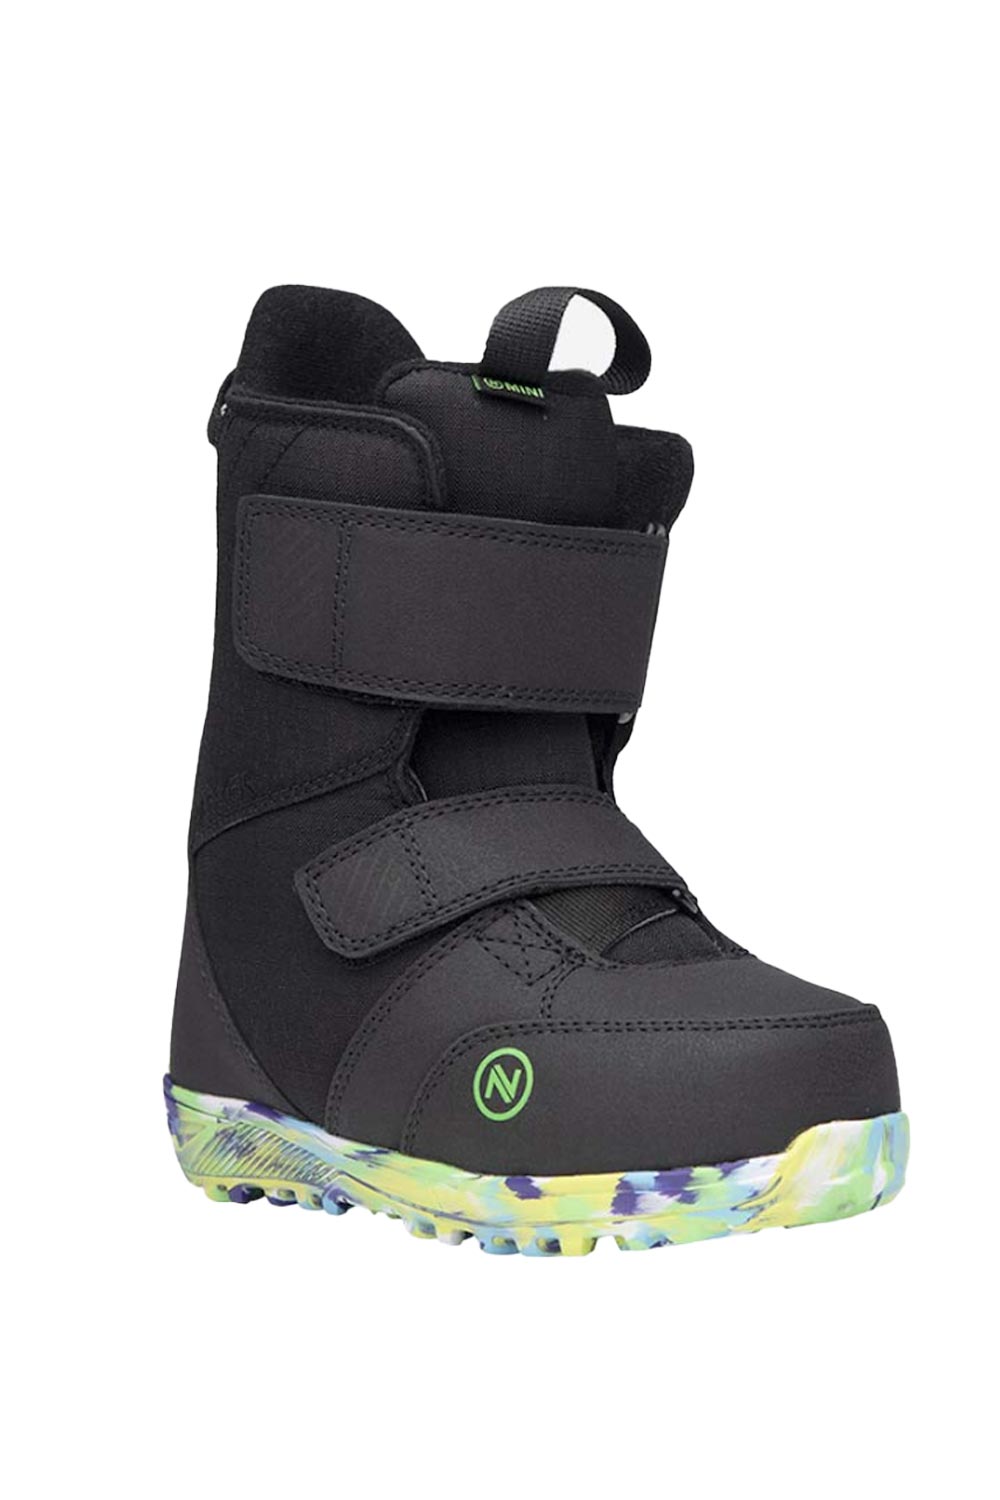 Nidecker toddler snowboard boots, black with velcro closures